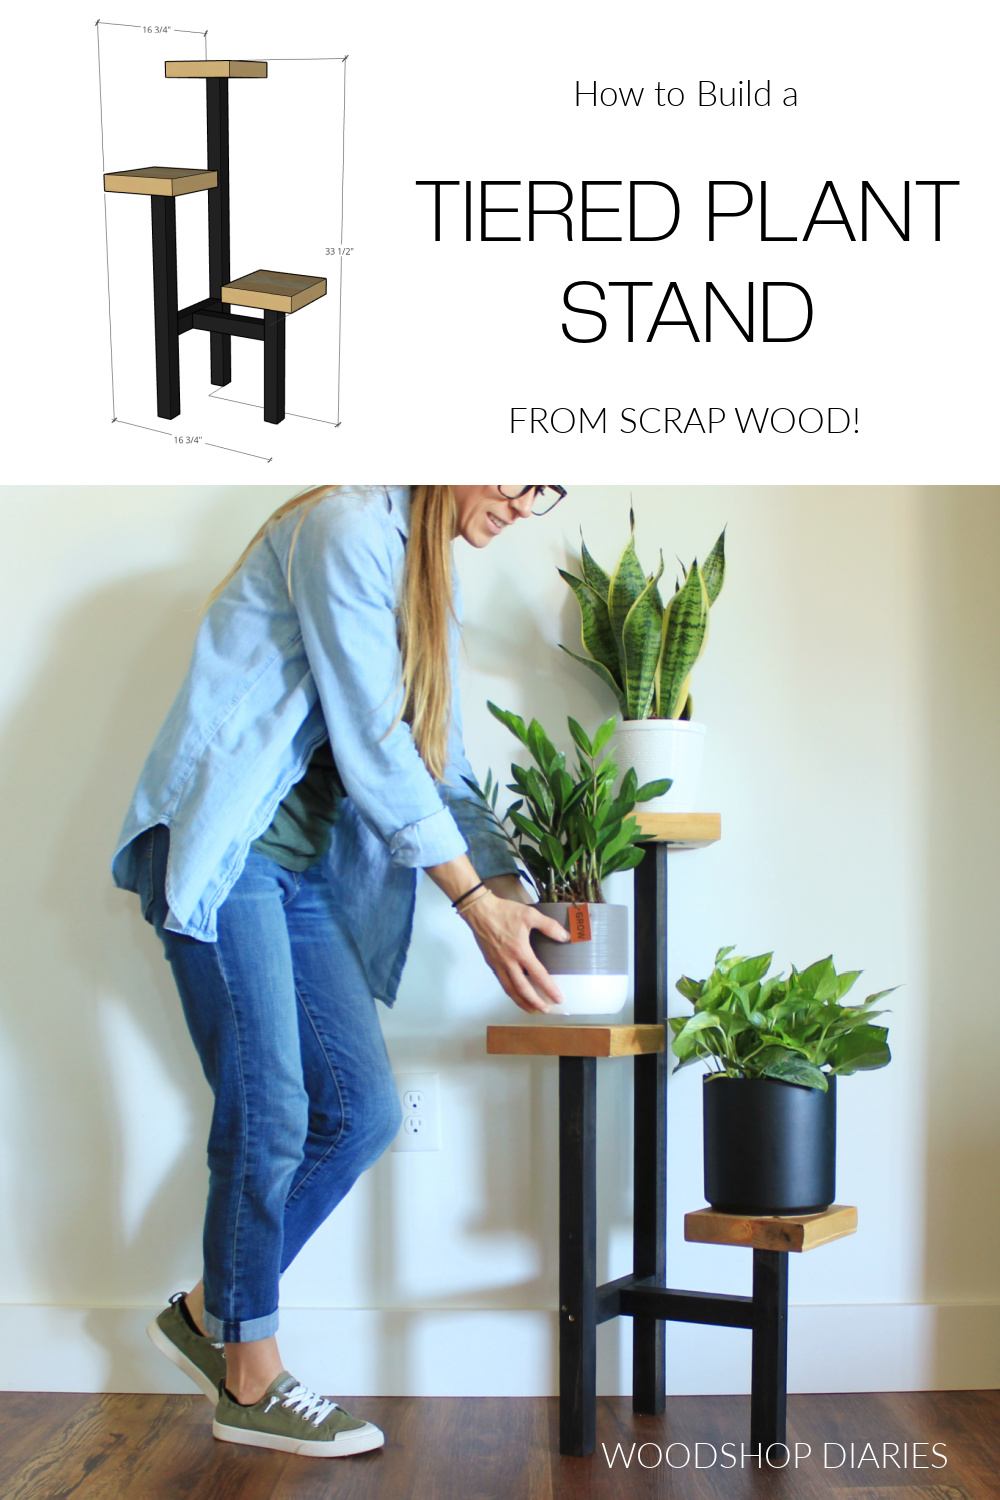 Pinterest collage image showing Shara setting plant on stand at bottom and overall dimensional diagram at top with text "how to build a tiered plant stand from scrap wood"